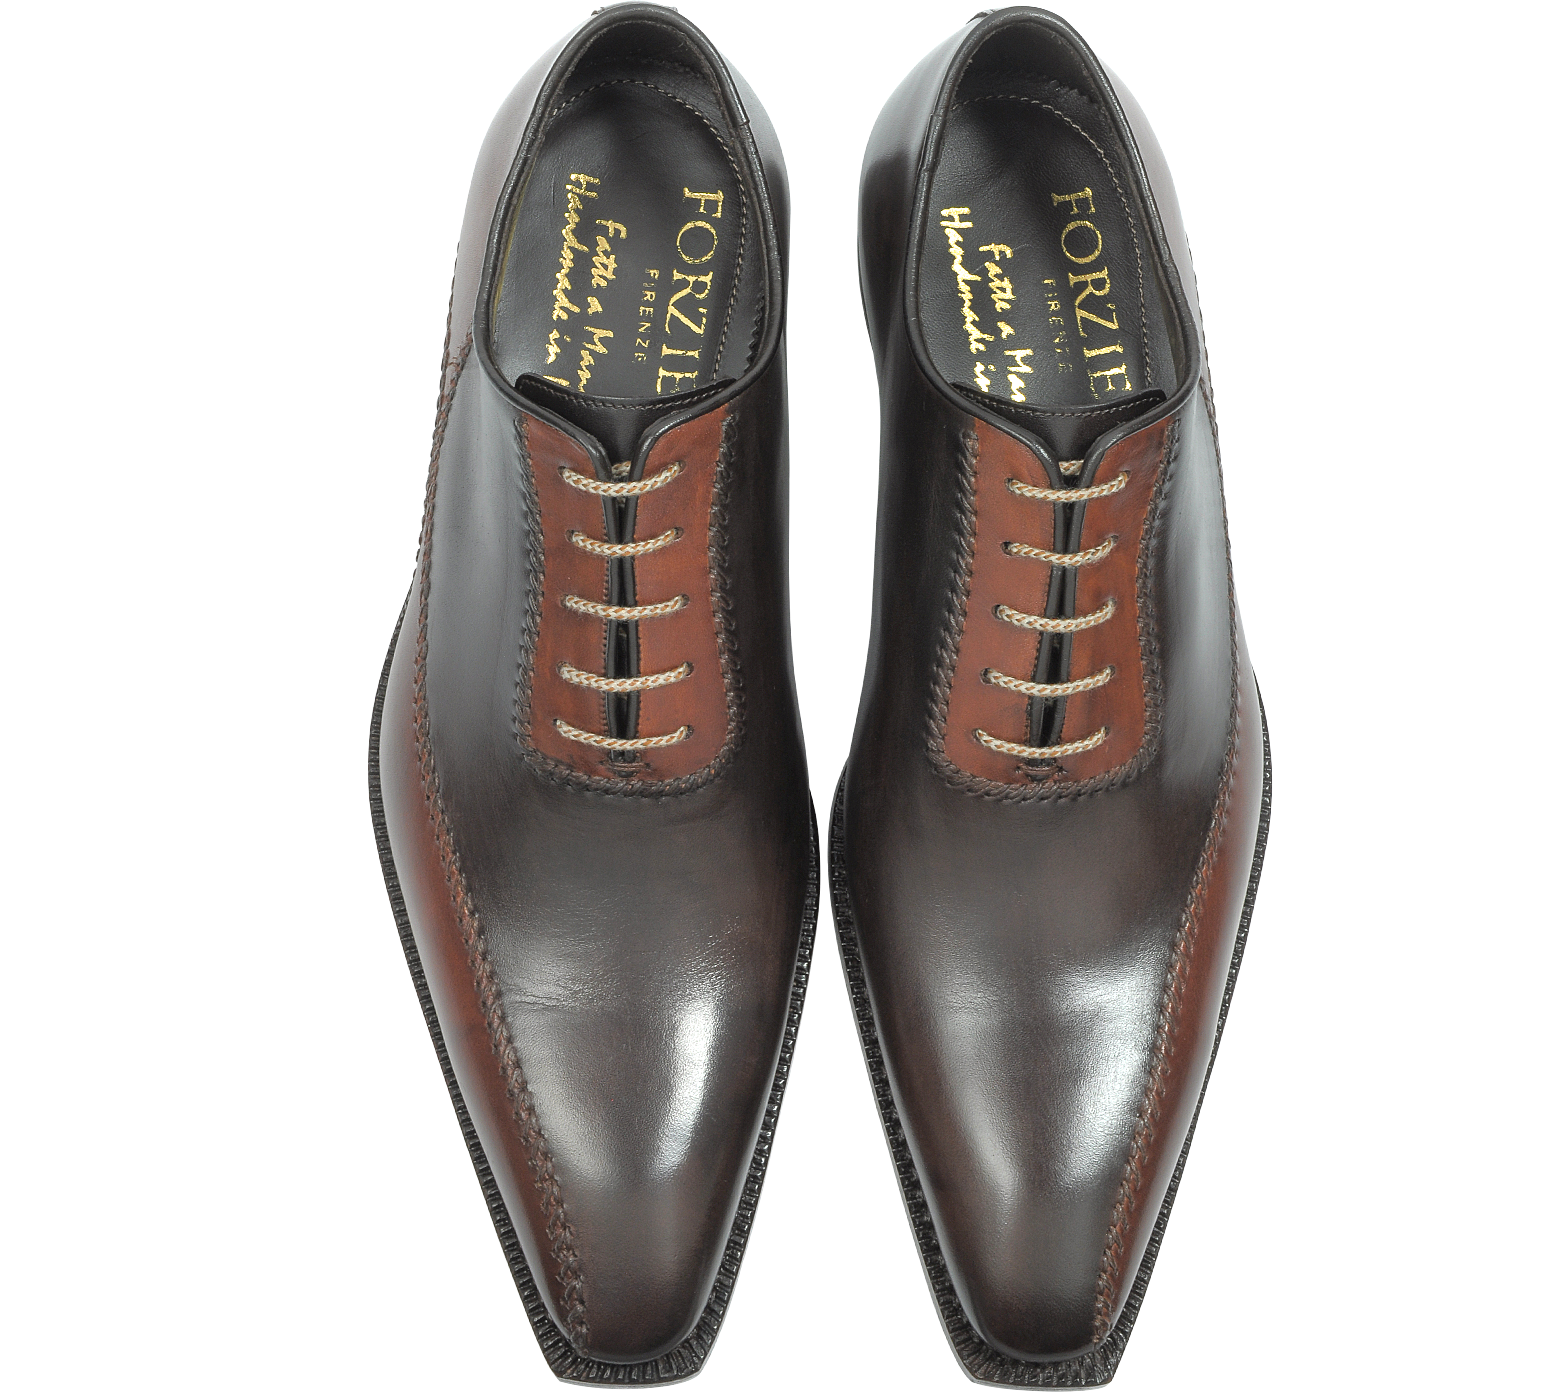 Forzieri Dark Brown Italian Handcrafted Leather Oxford Shoes 6 US  UK  | 40 EU at FORZIERI